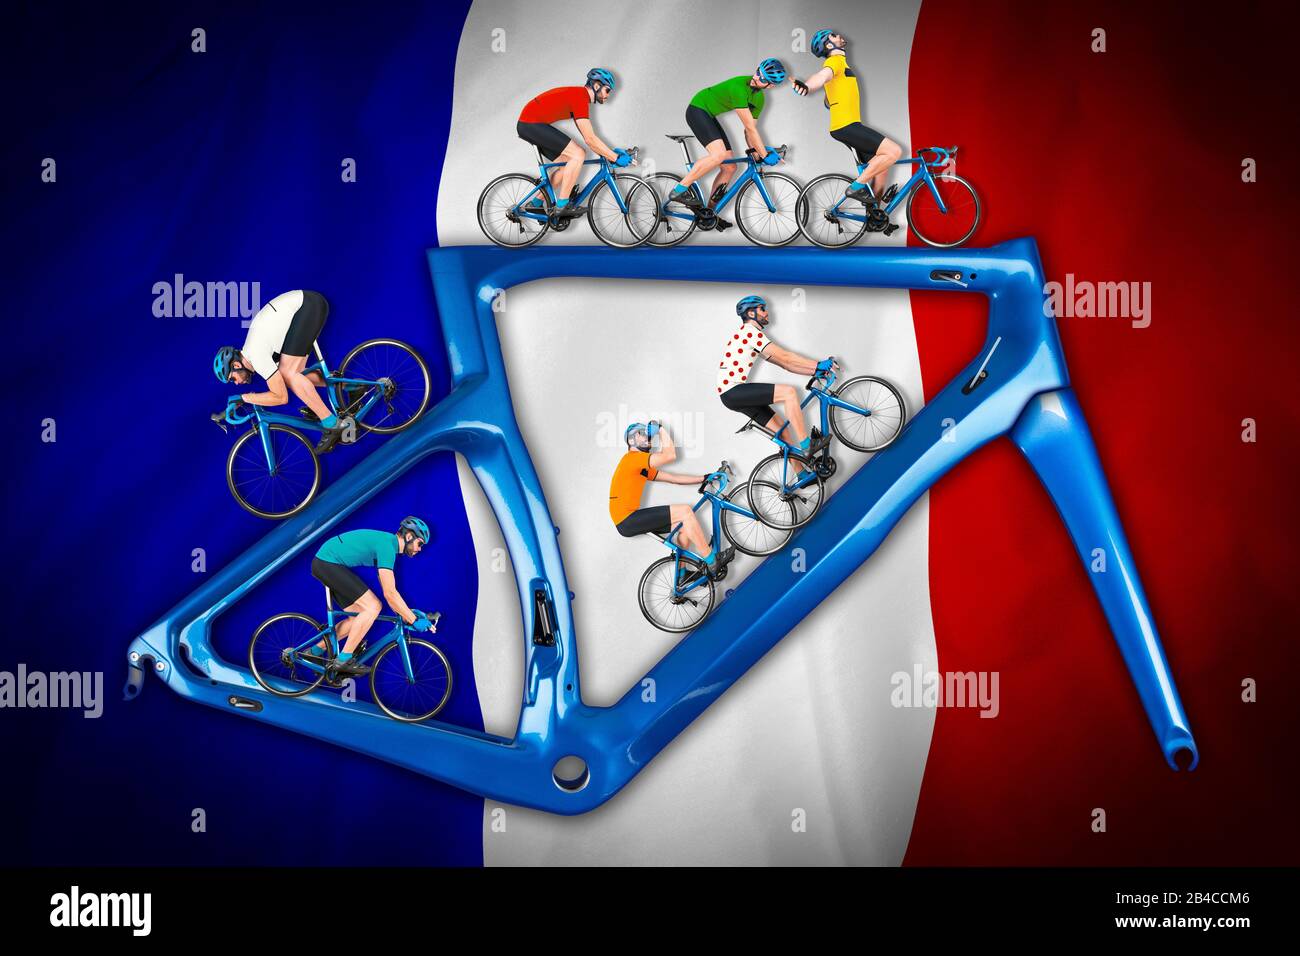 bicycle road racing tour concept. cyclist in competition jersey on race bike riding on a modern blue carbon frame on blue white red french france flag Stock Photo